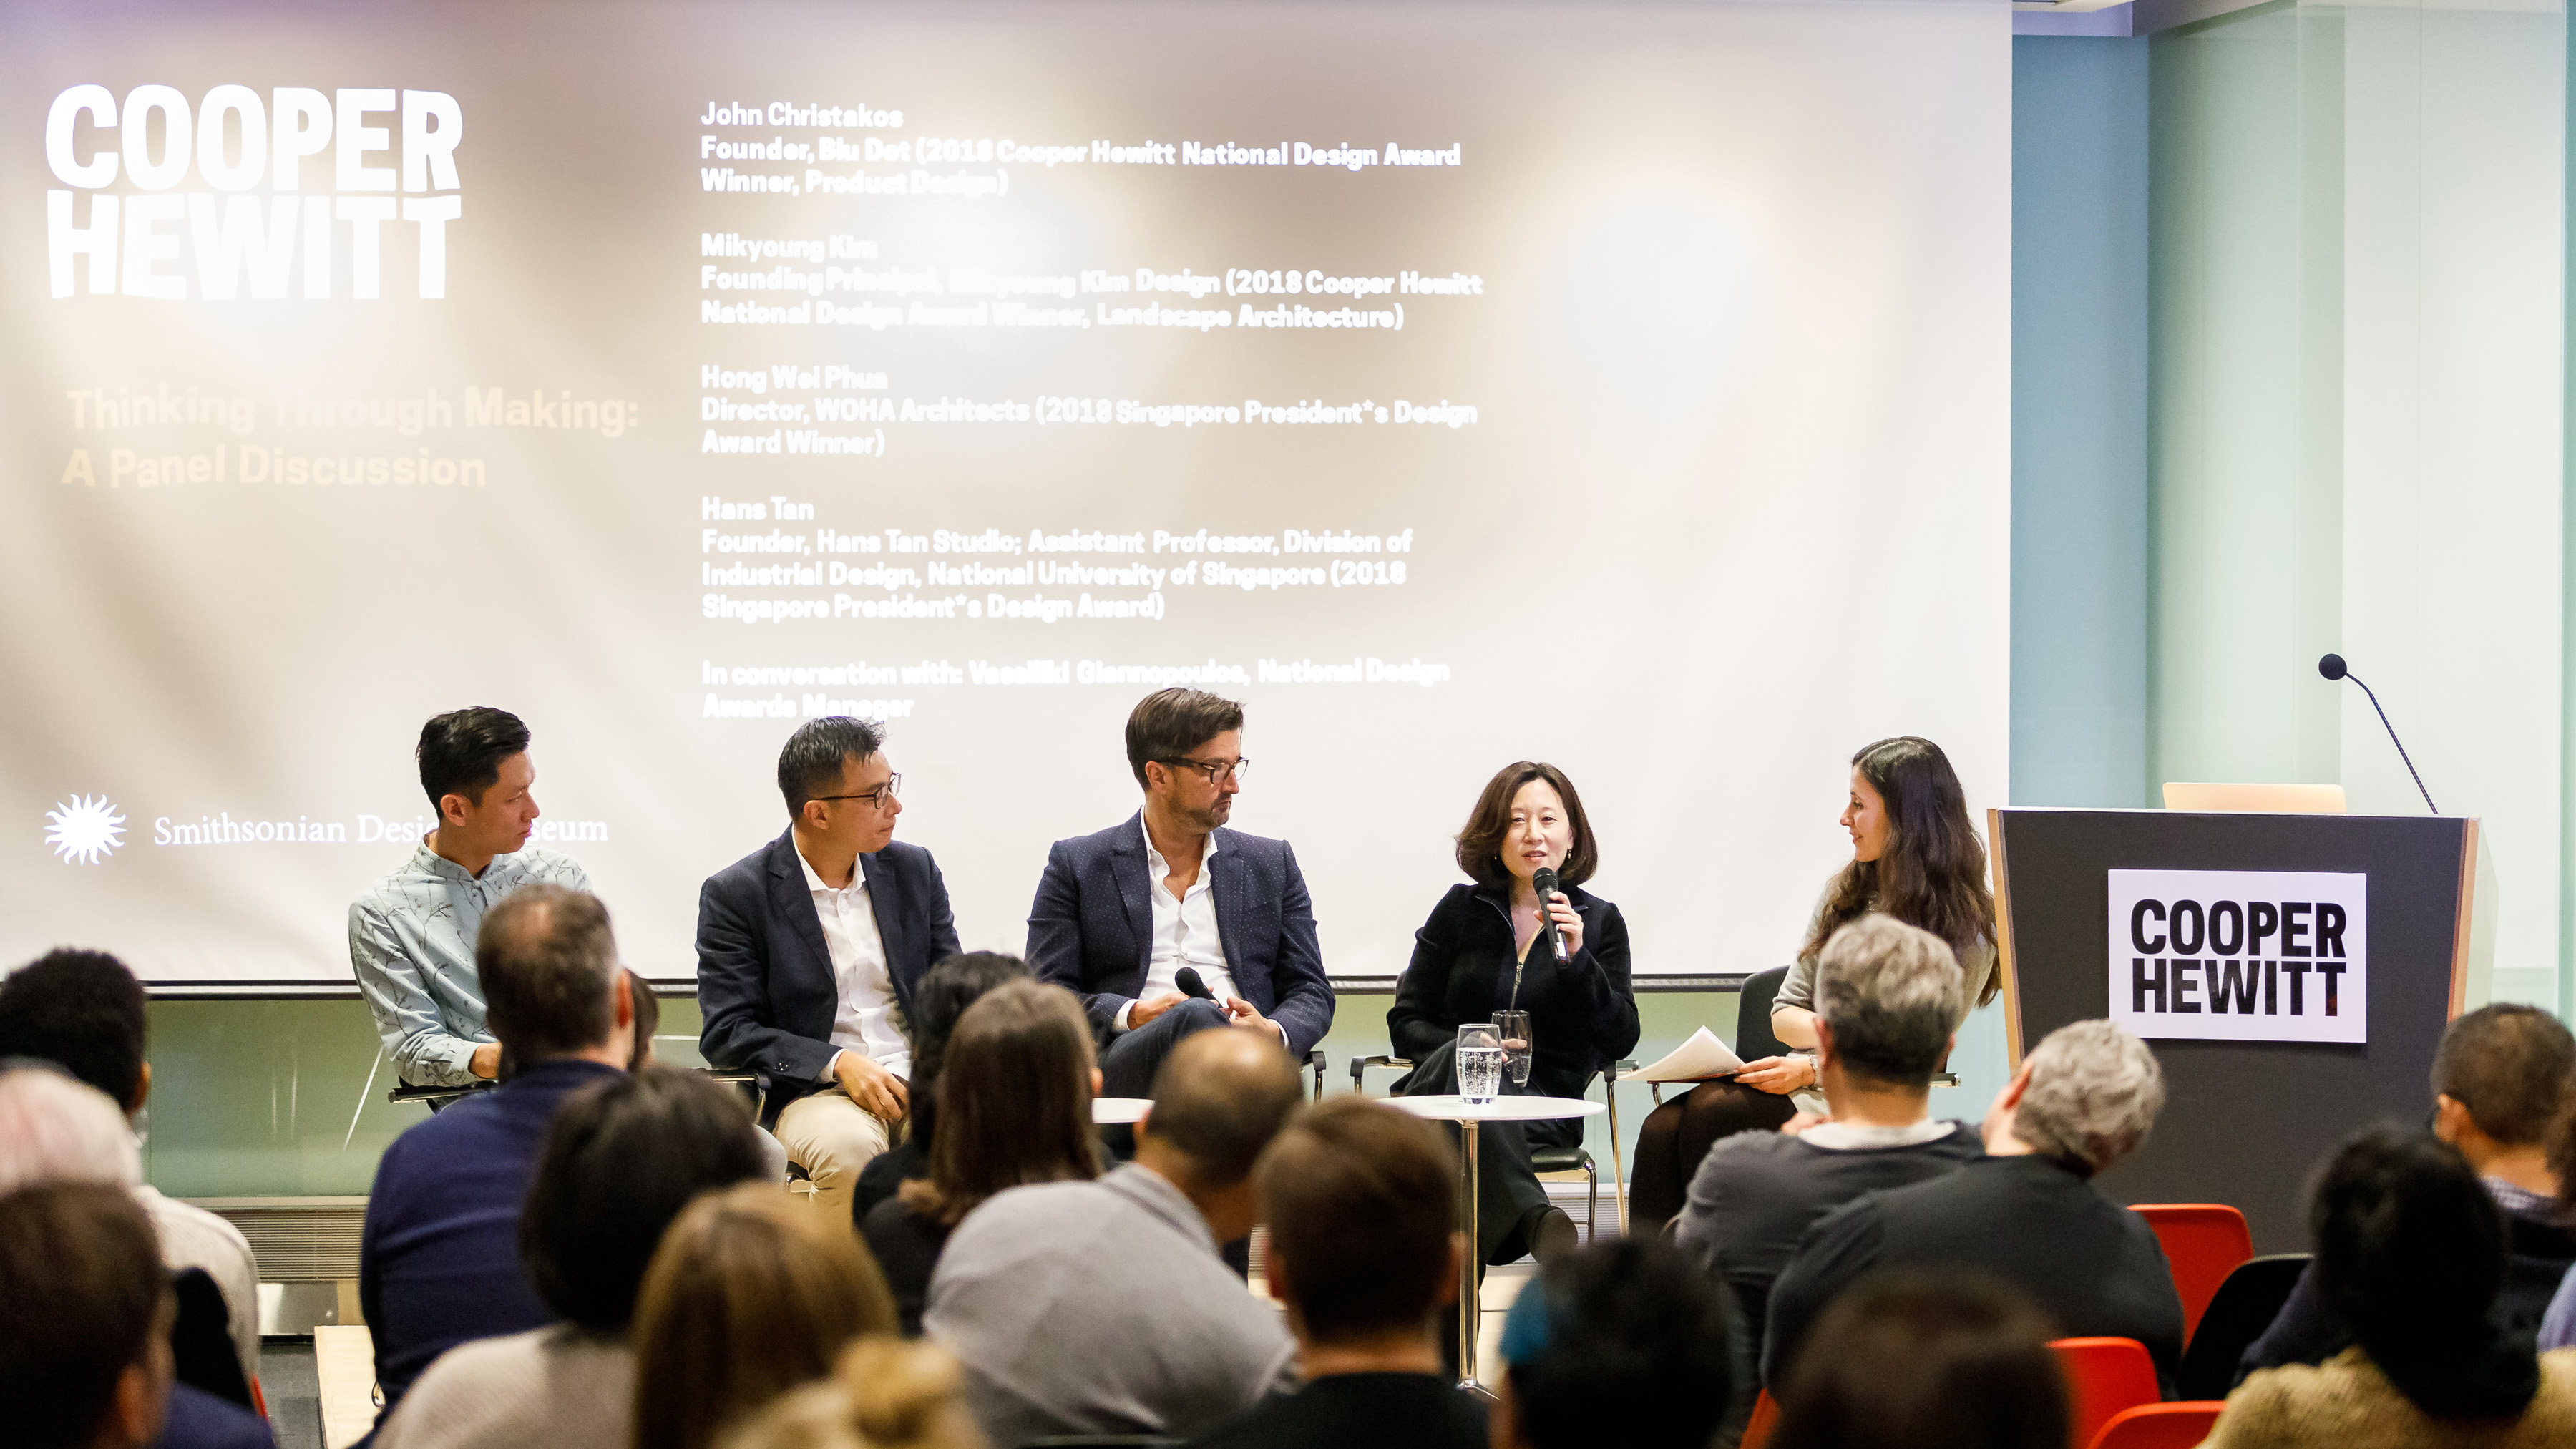 Image of a panel discussion at Cooper Hewitt. ON stage from left to right are Hans Tan, Hong Wei Phua, John Christakos, Mikyoung Kim, and Vasso Giannopoulos